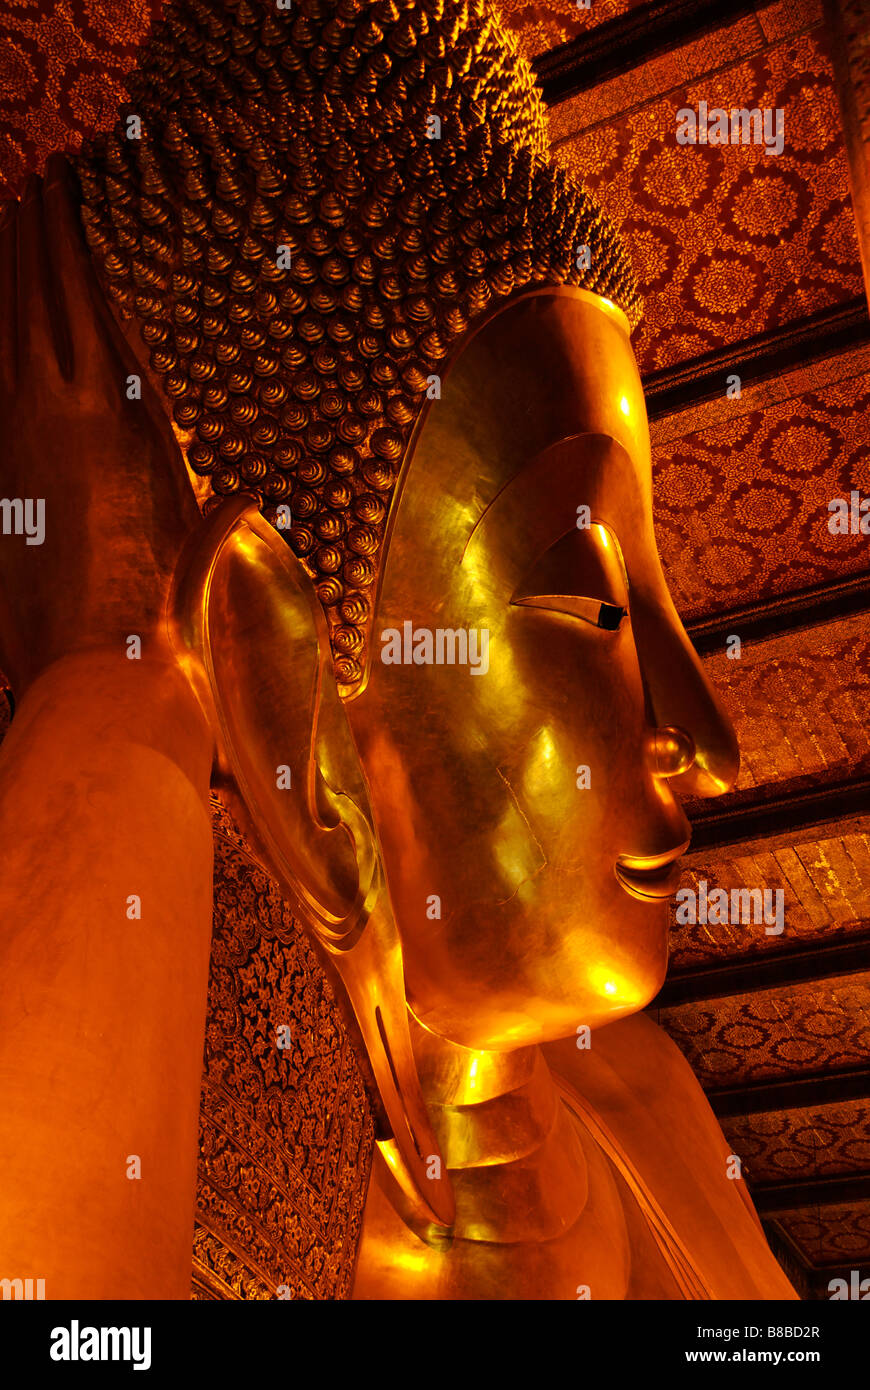 Face of reclining golden buddha statue in Wat Pho temple Phra Nakorn district in central Bangkok Thailand Stock Photo